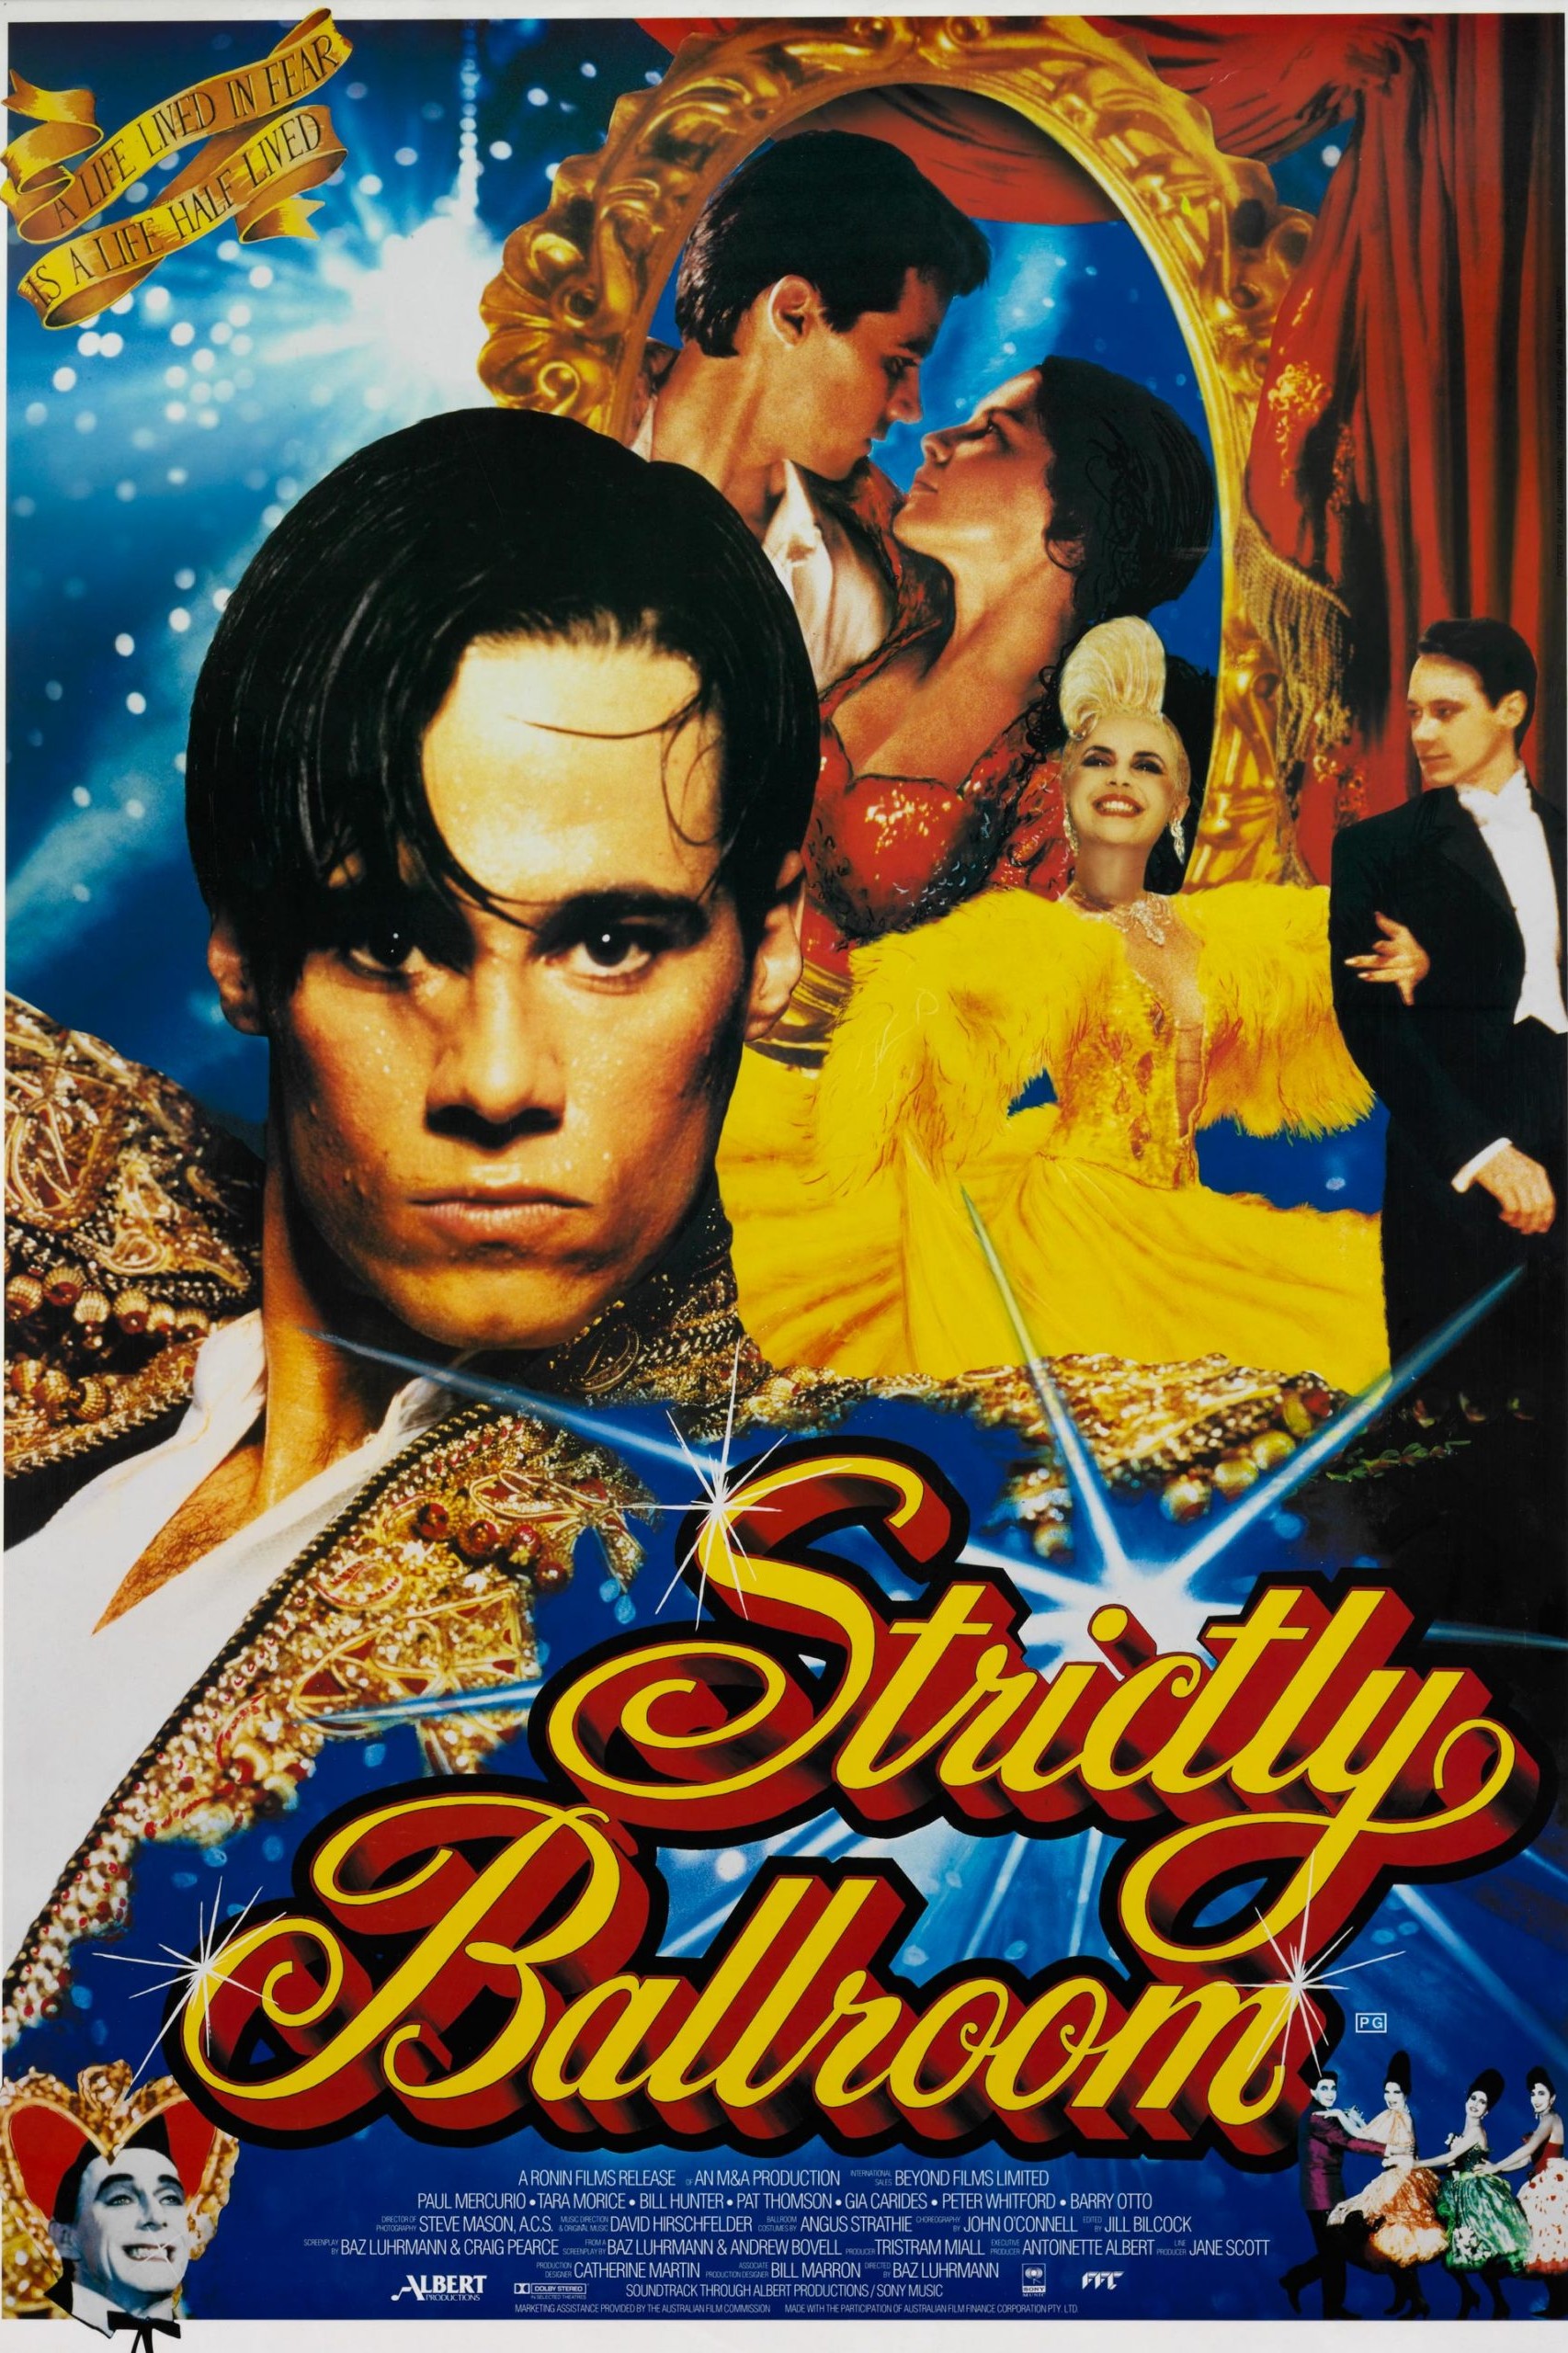 Strictly Ballroom promo poster